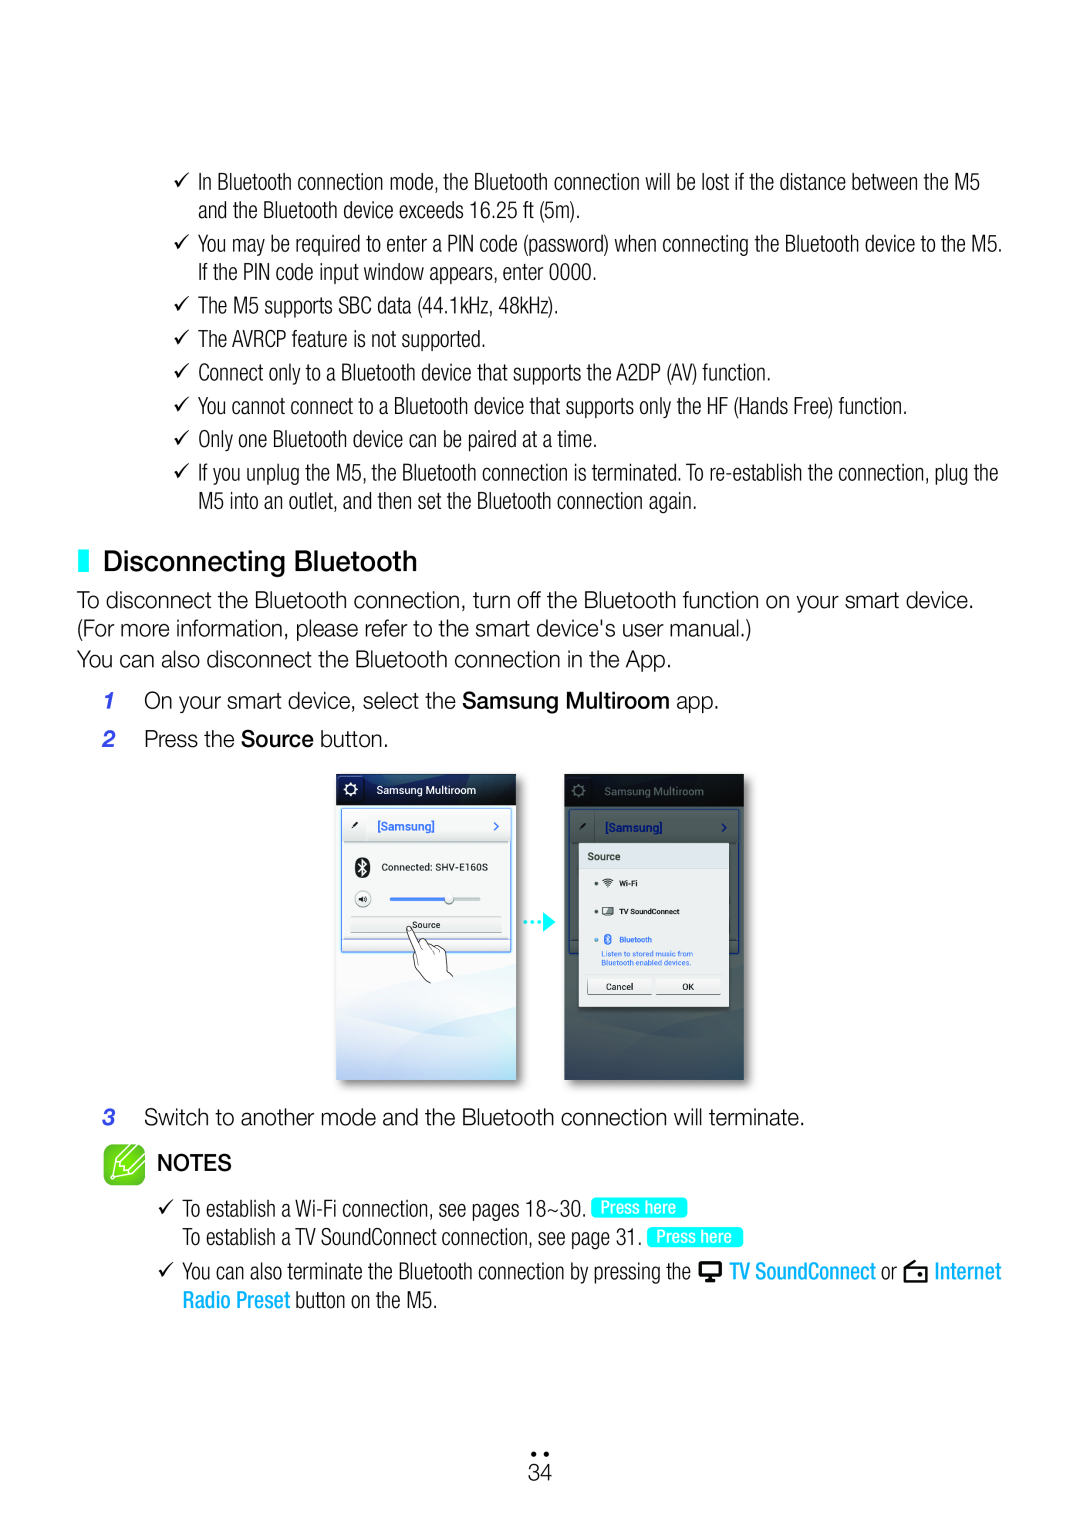 Samsung M5 user manual Disconnecting Bluetooth, 99To establish a Wi-Fi connection, see pages 18~30 